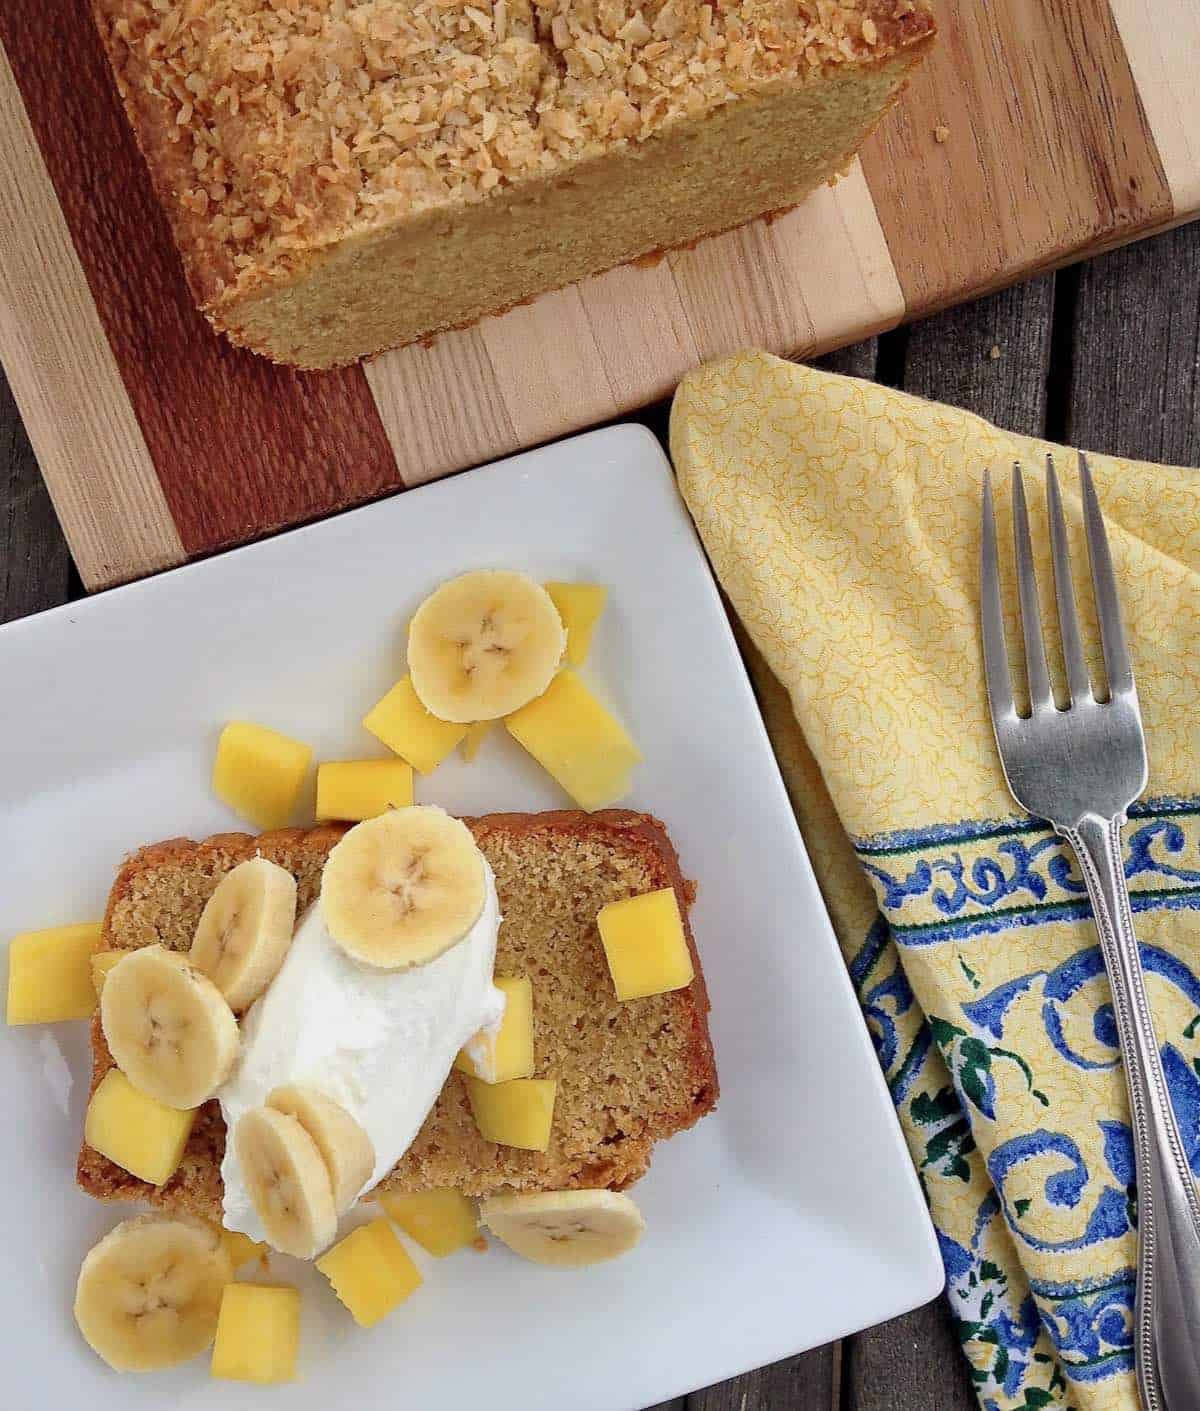 easy coconut snack cake with banana and pineapple and yogurt on top